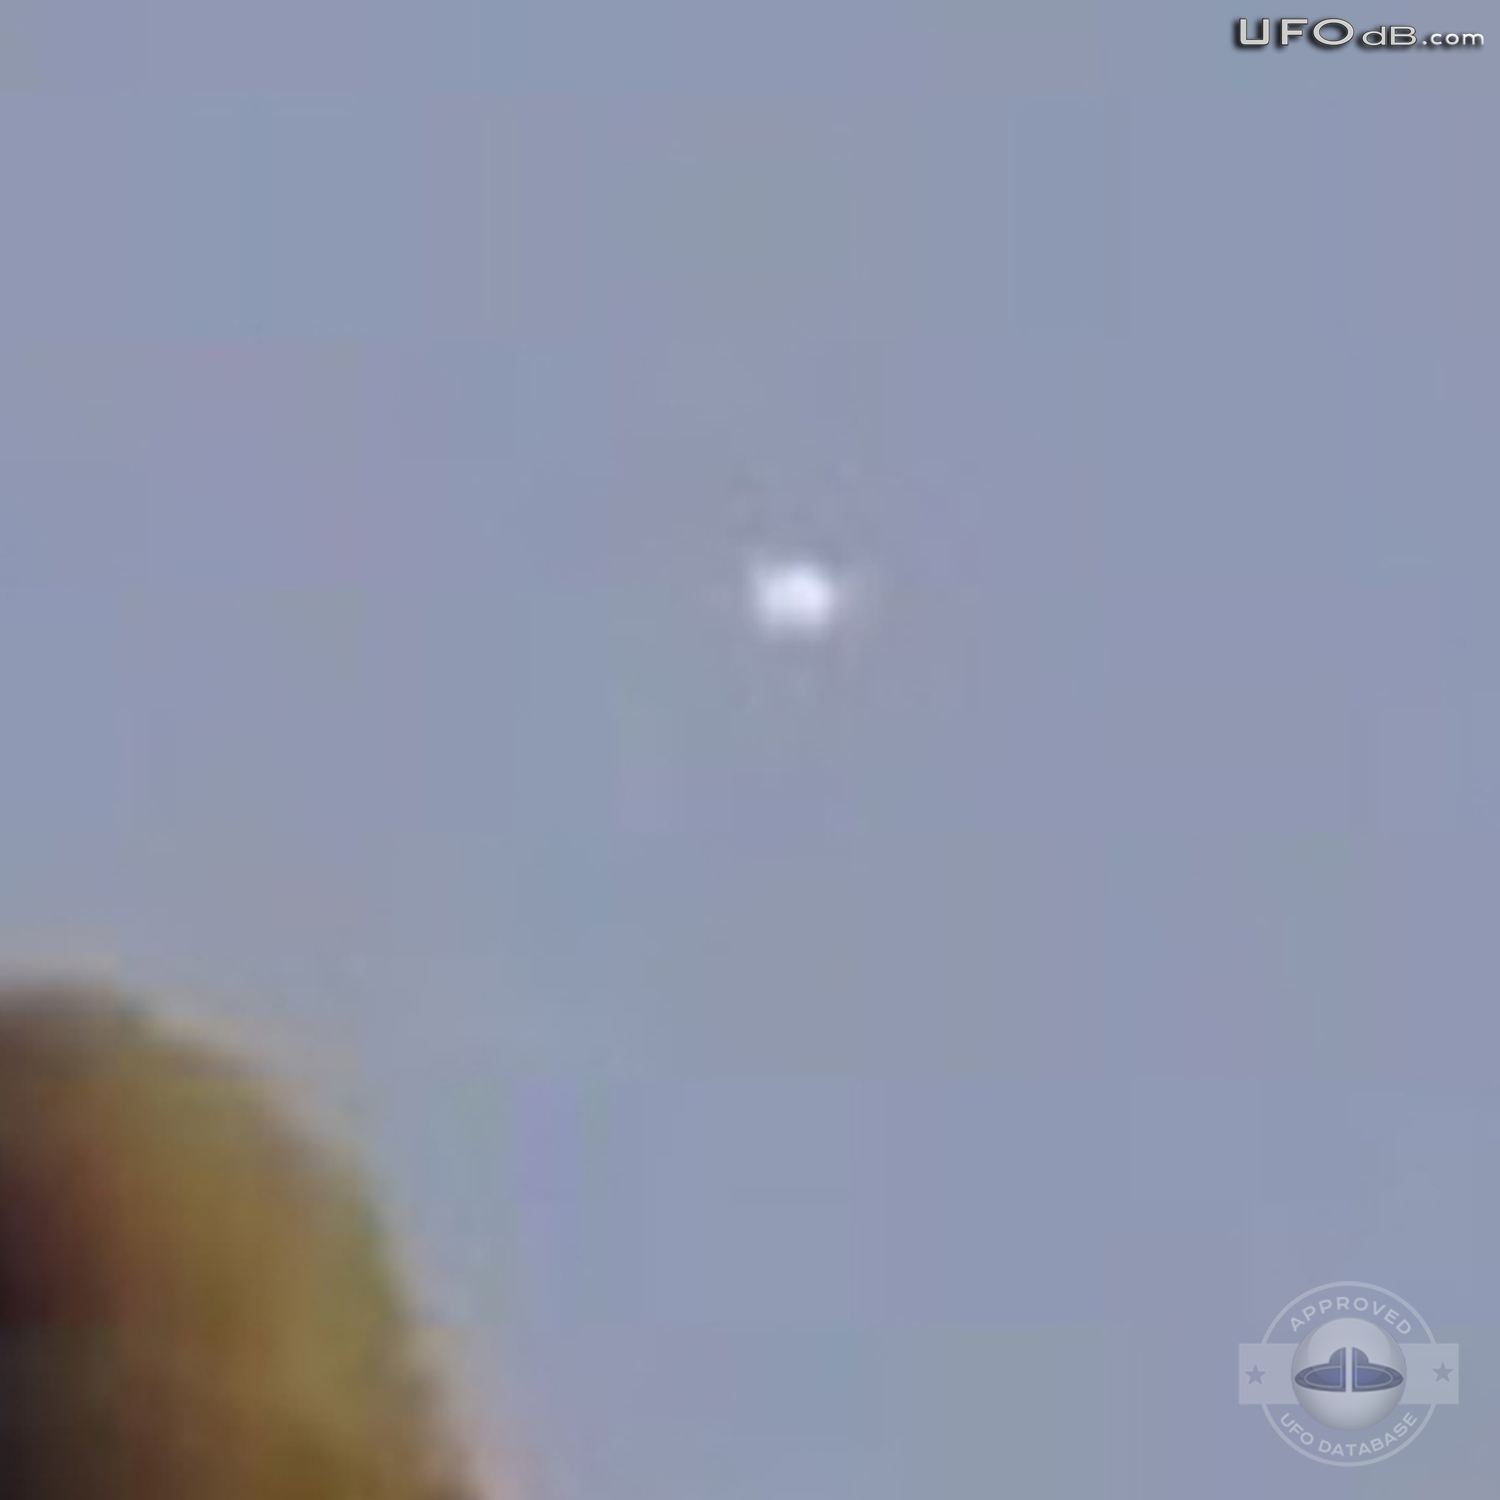 White craft UFO passing in the clouds of Mexico City | May 13 2011 UFO Picture #305-4